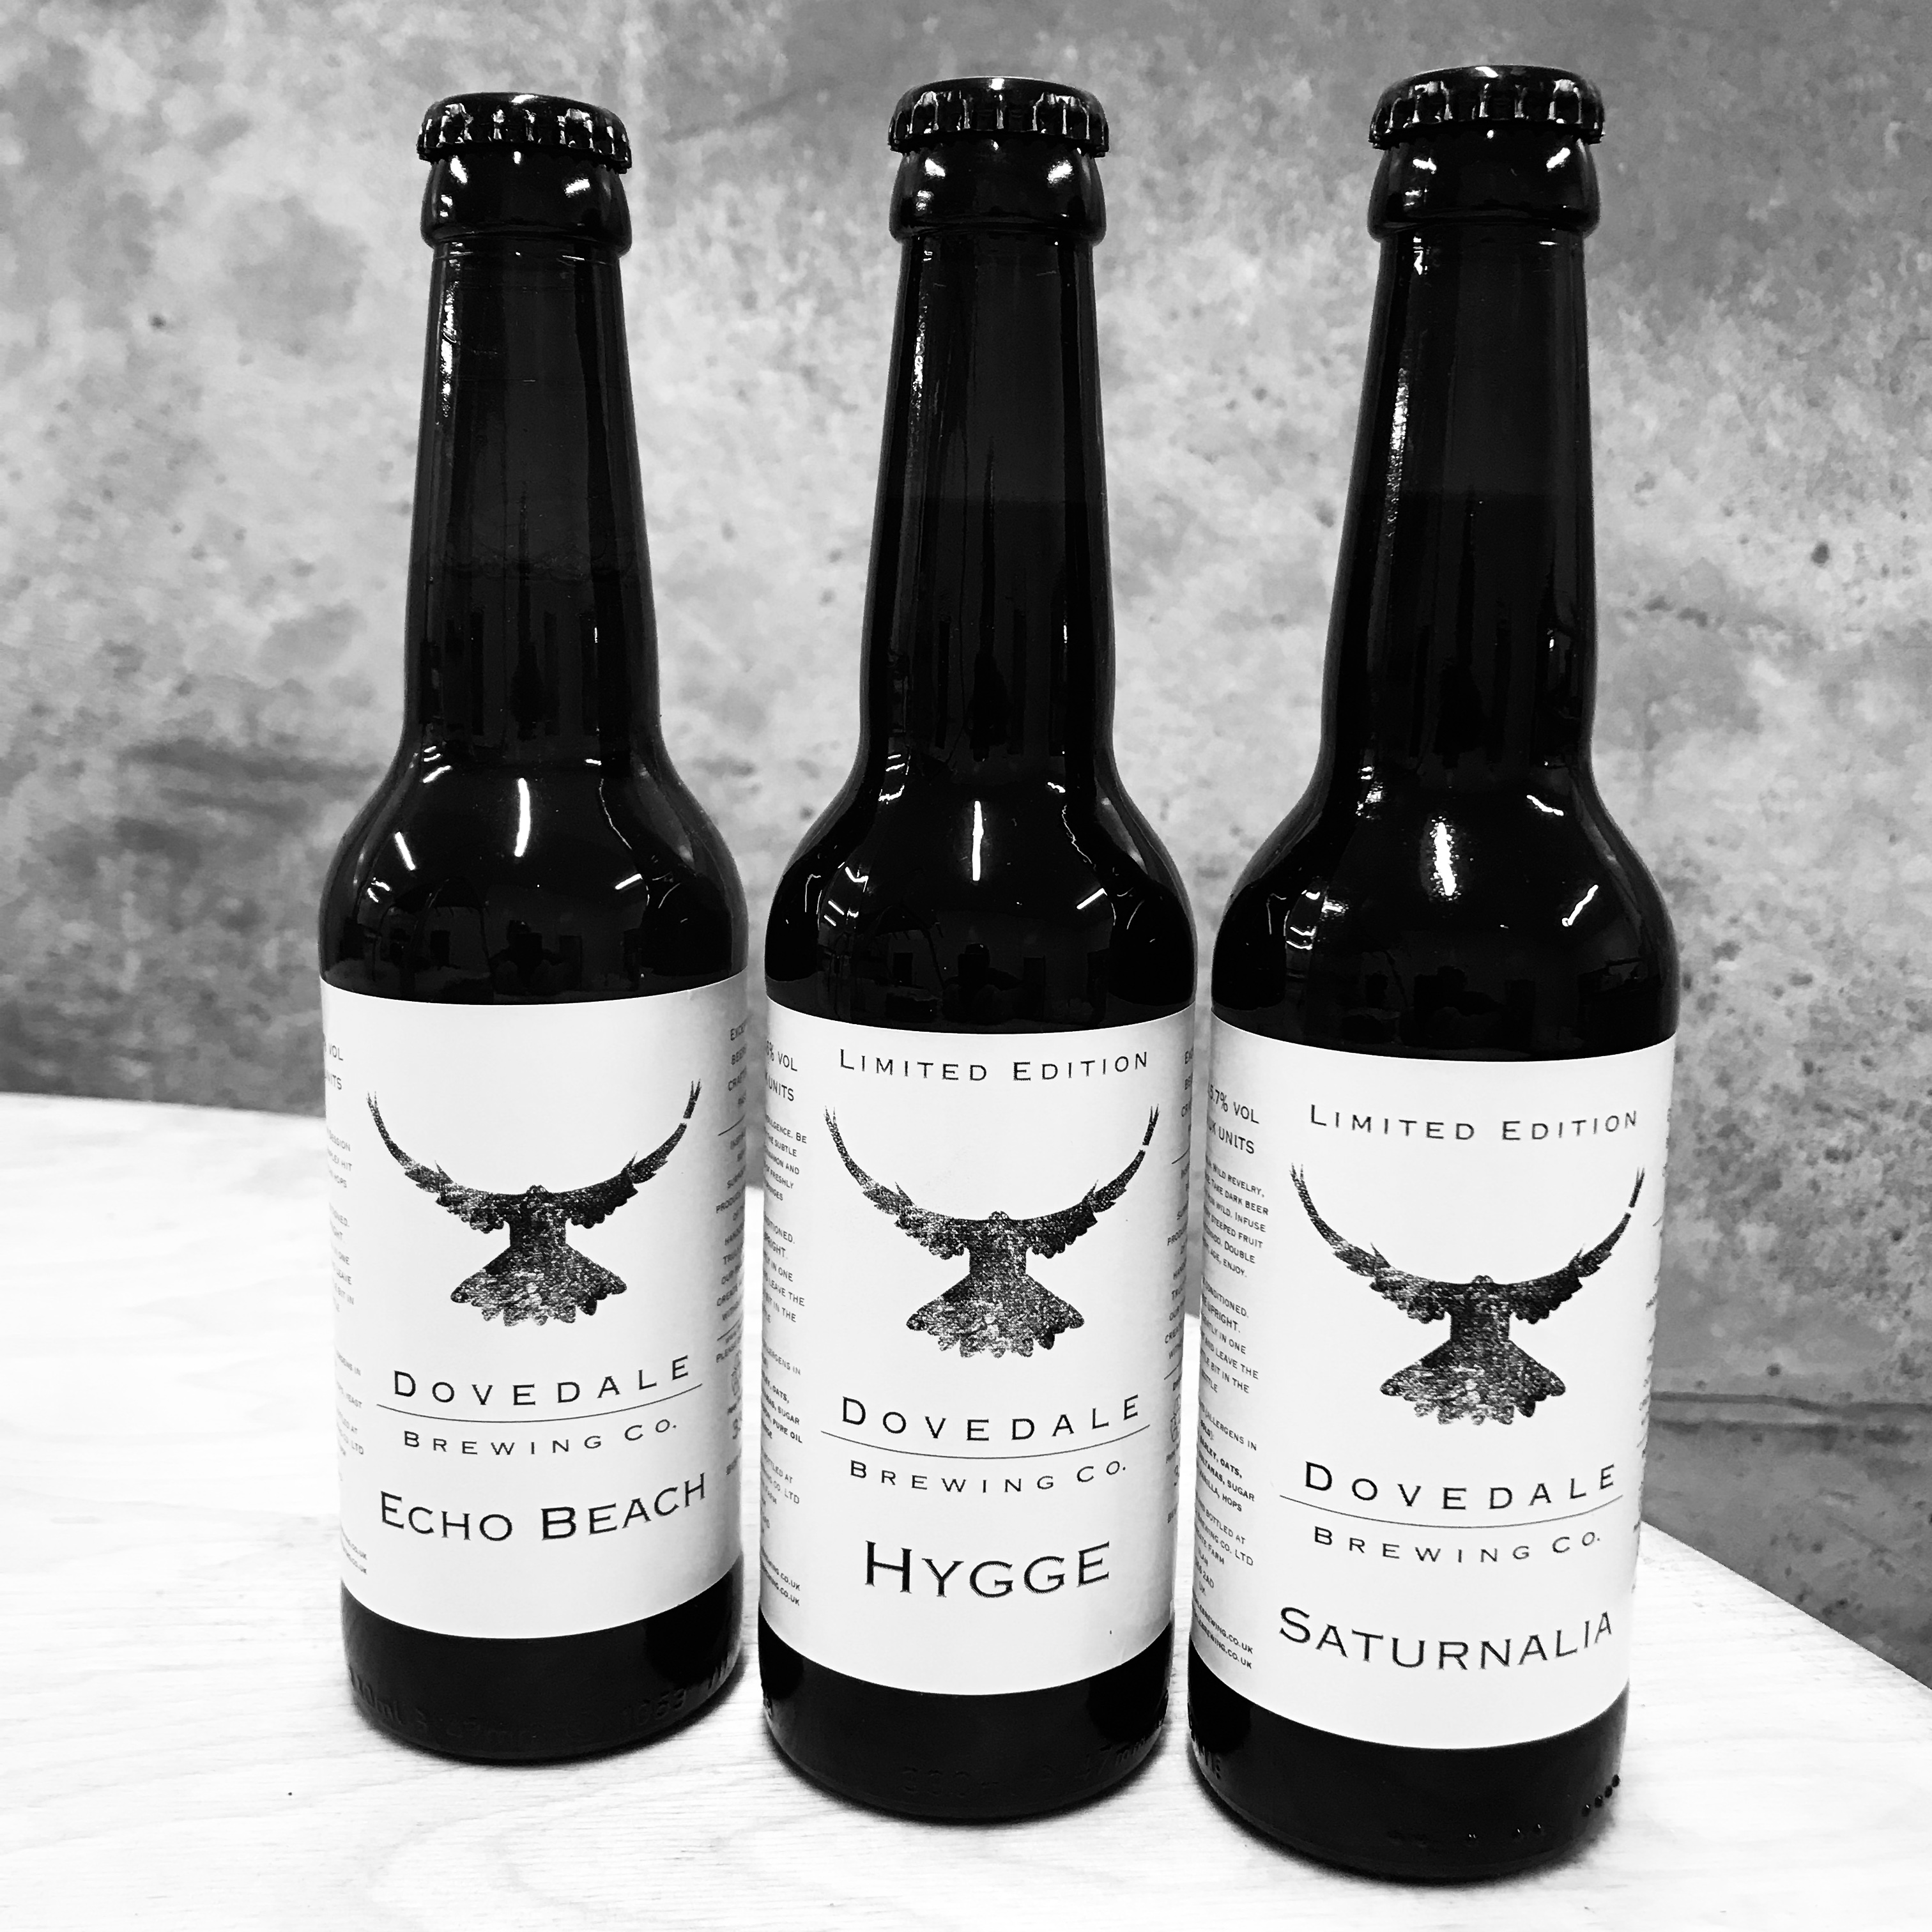 Dovedale Brewing Co.